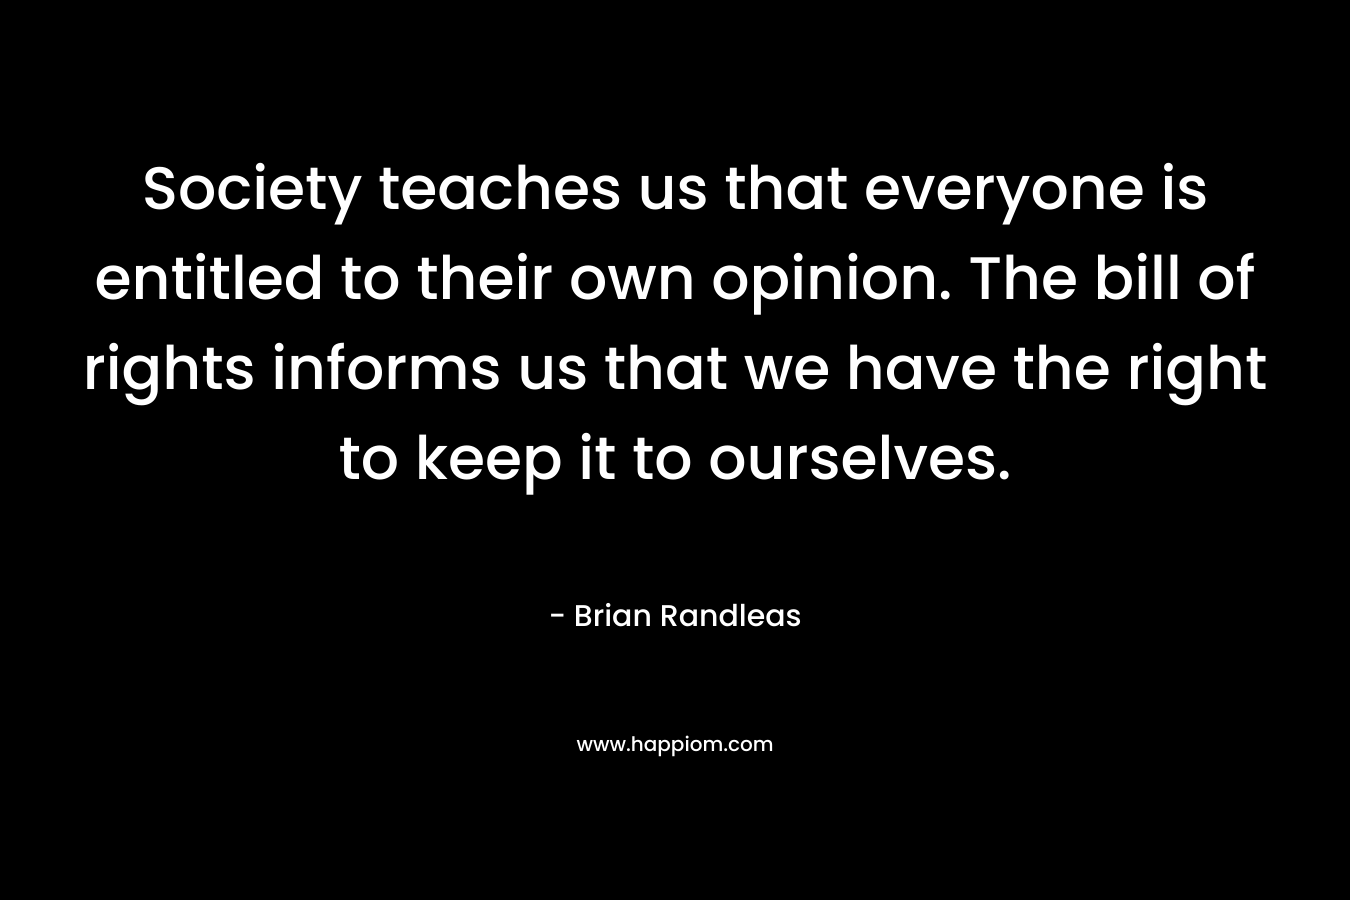 Society teaches us that everyone is entitled to their own opinion. The bill of rights informs us that we have the right to keep it to ourselves. – Brian Randleas